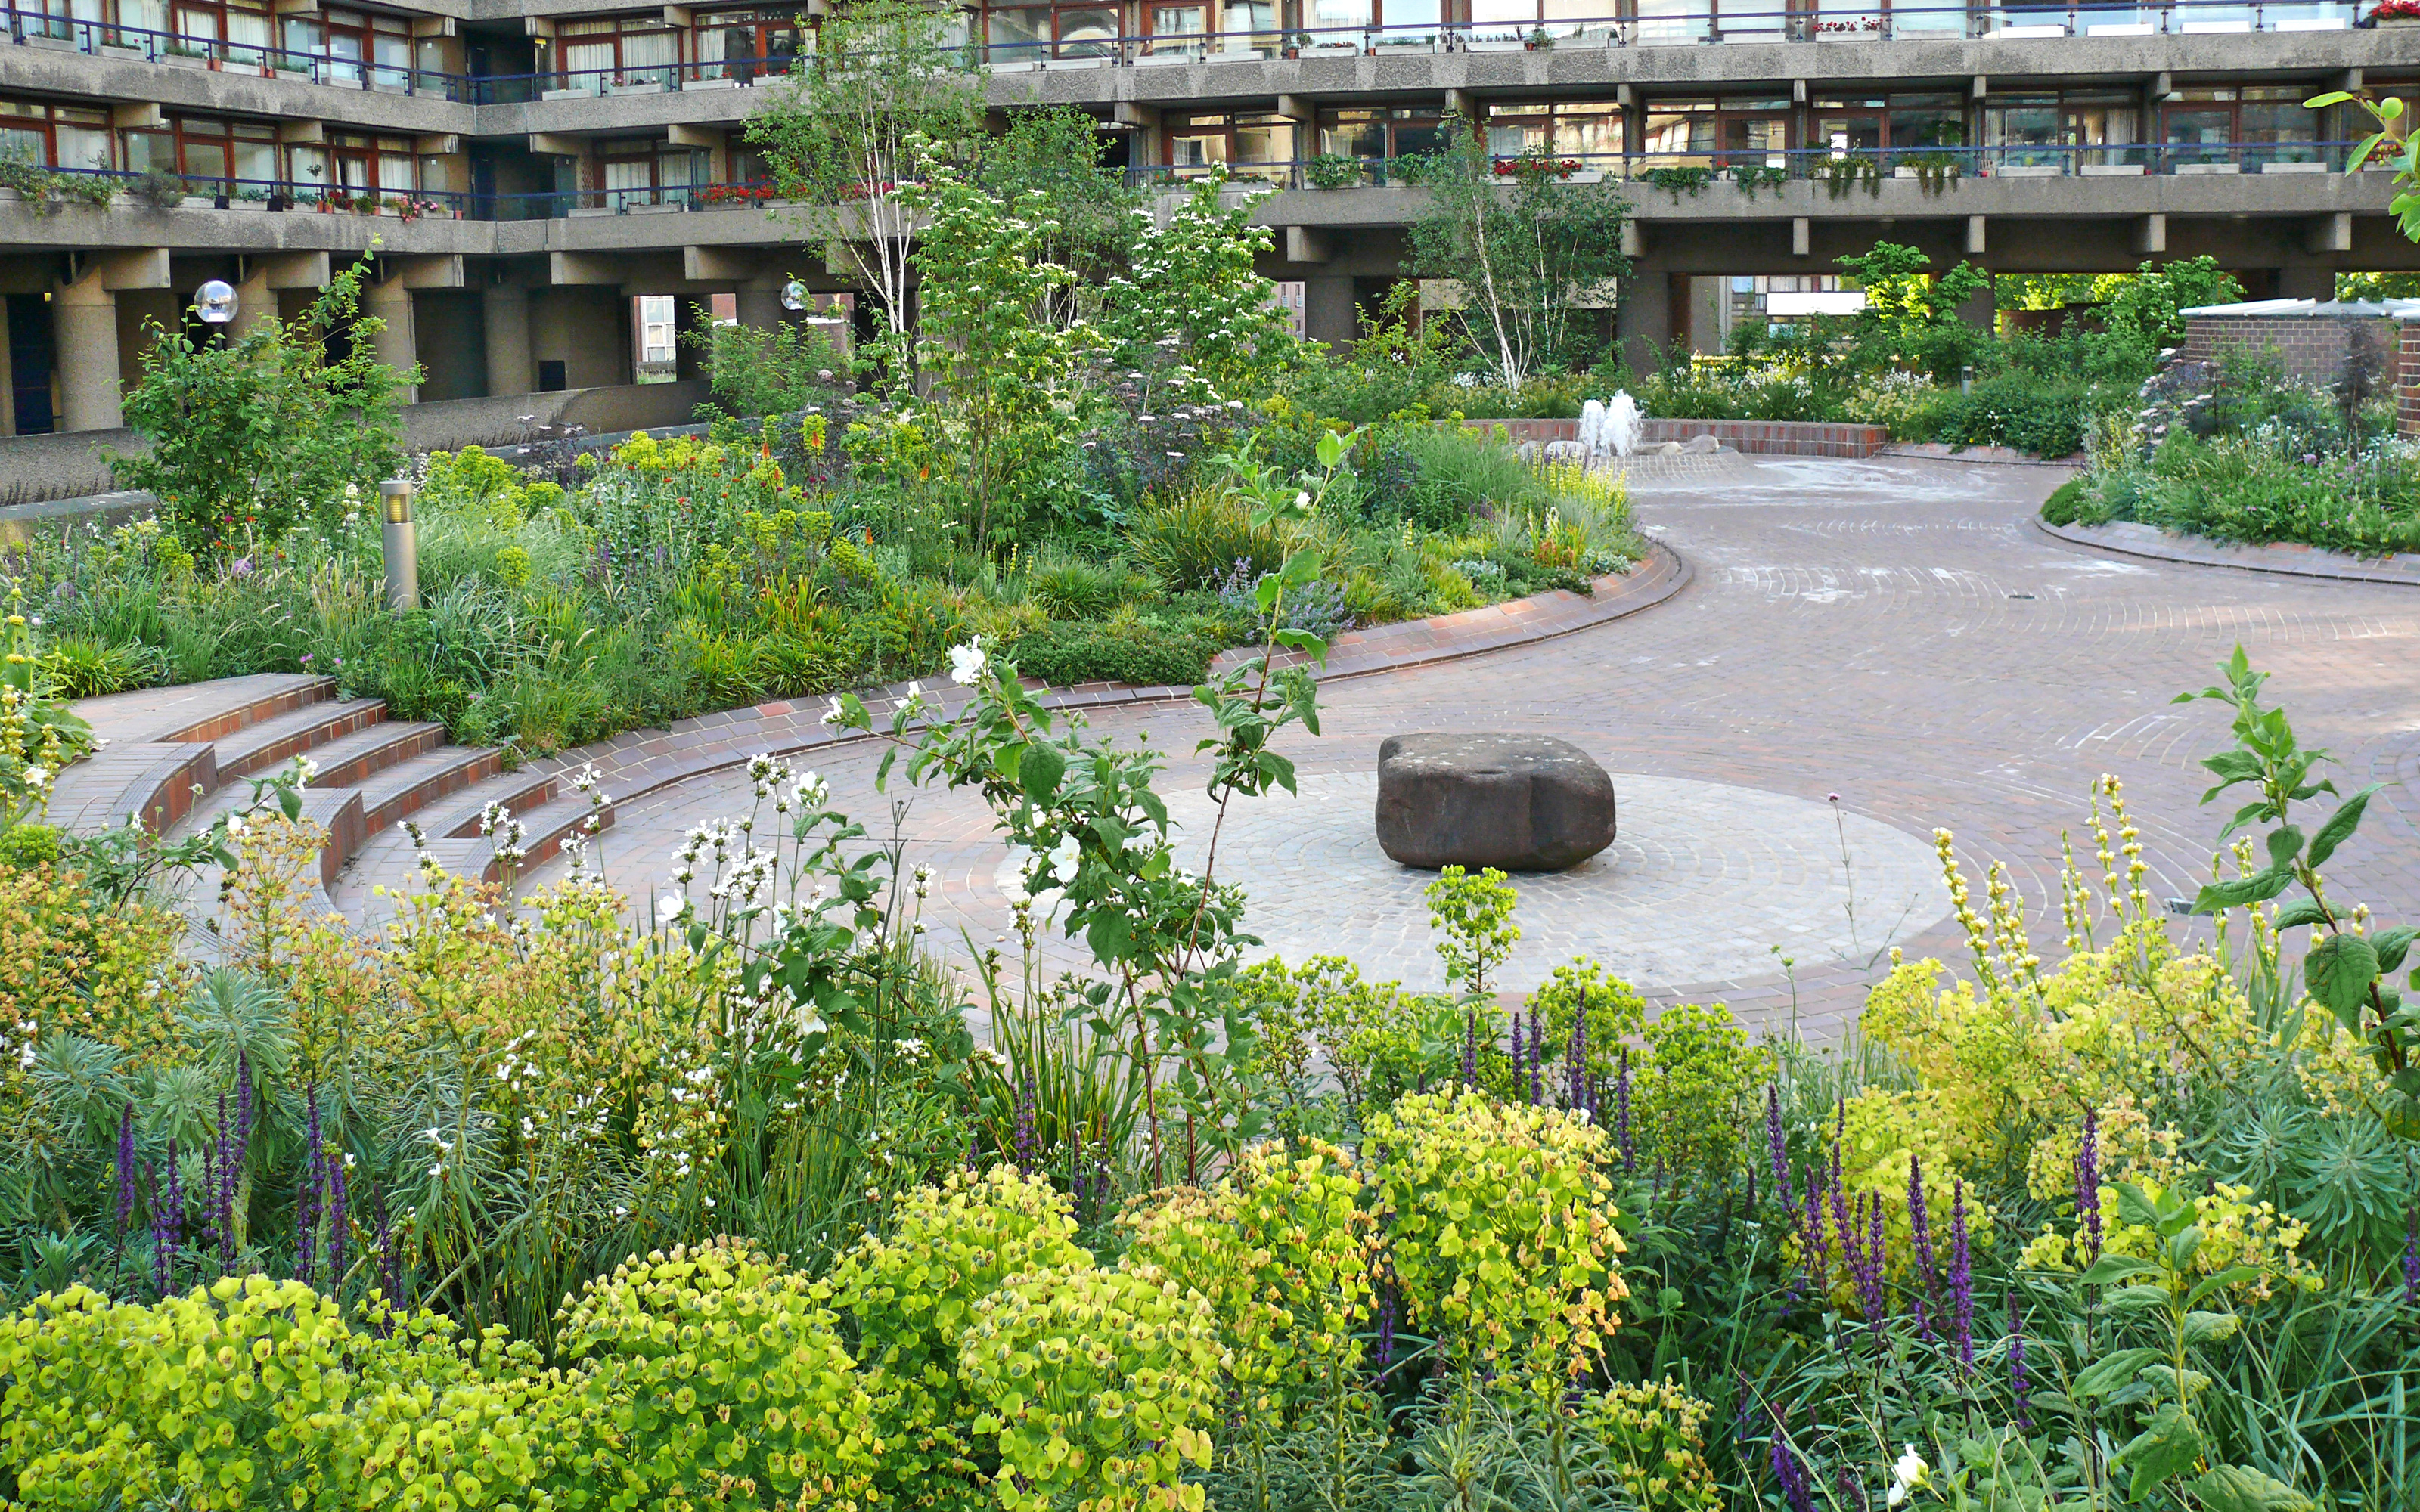 Plant beds with flowers and water feature surrounded by residential bocks